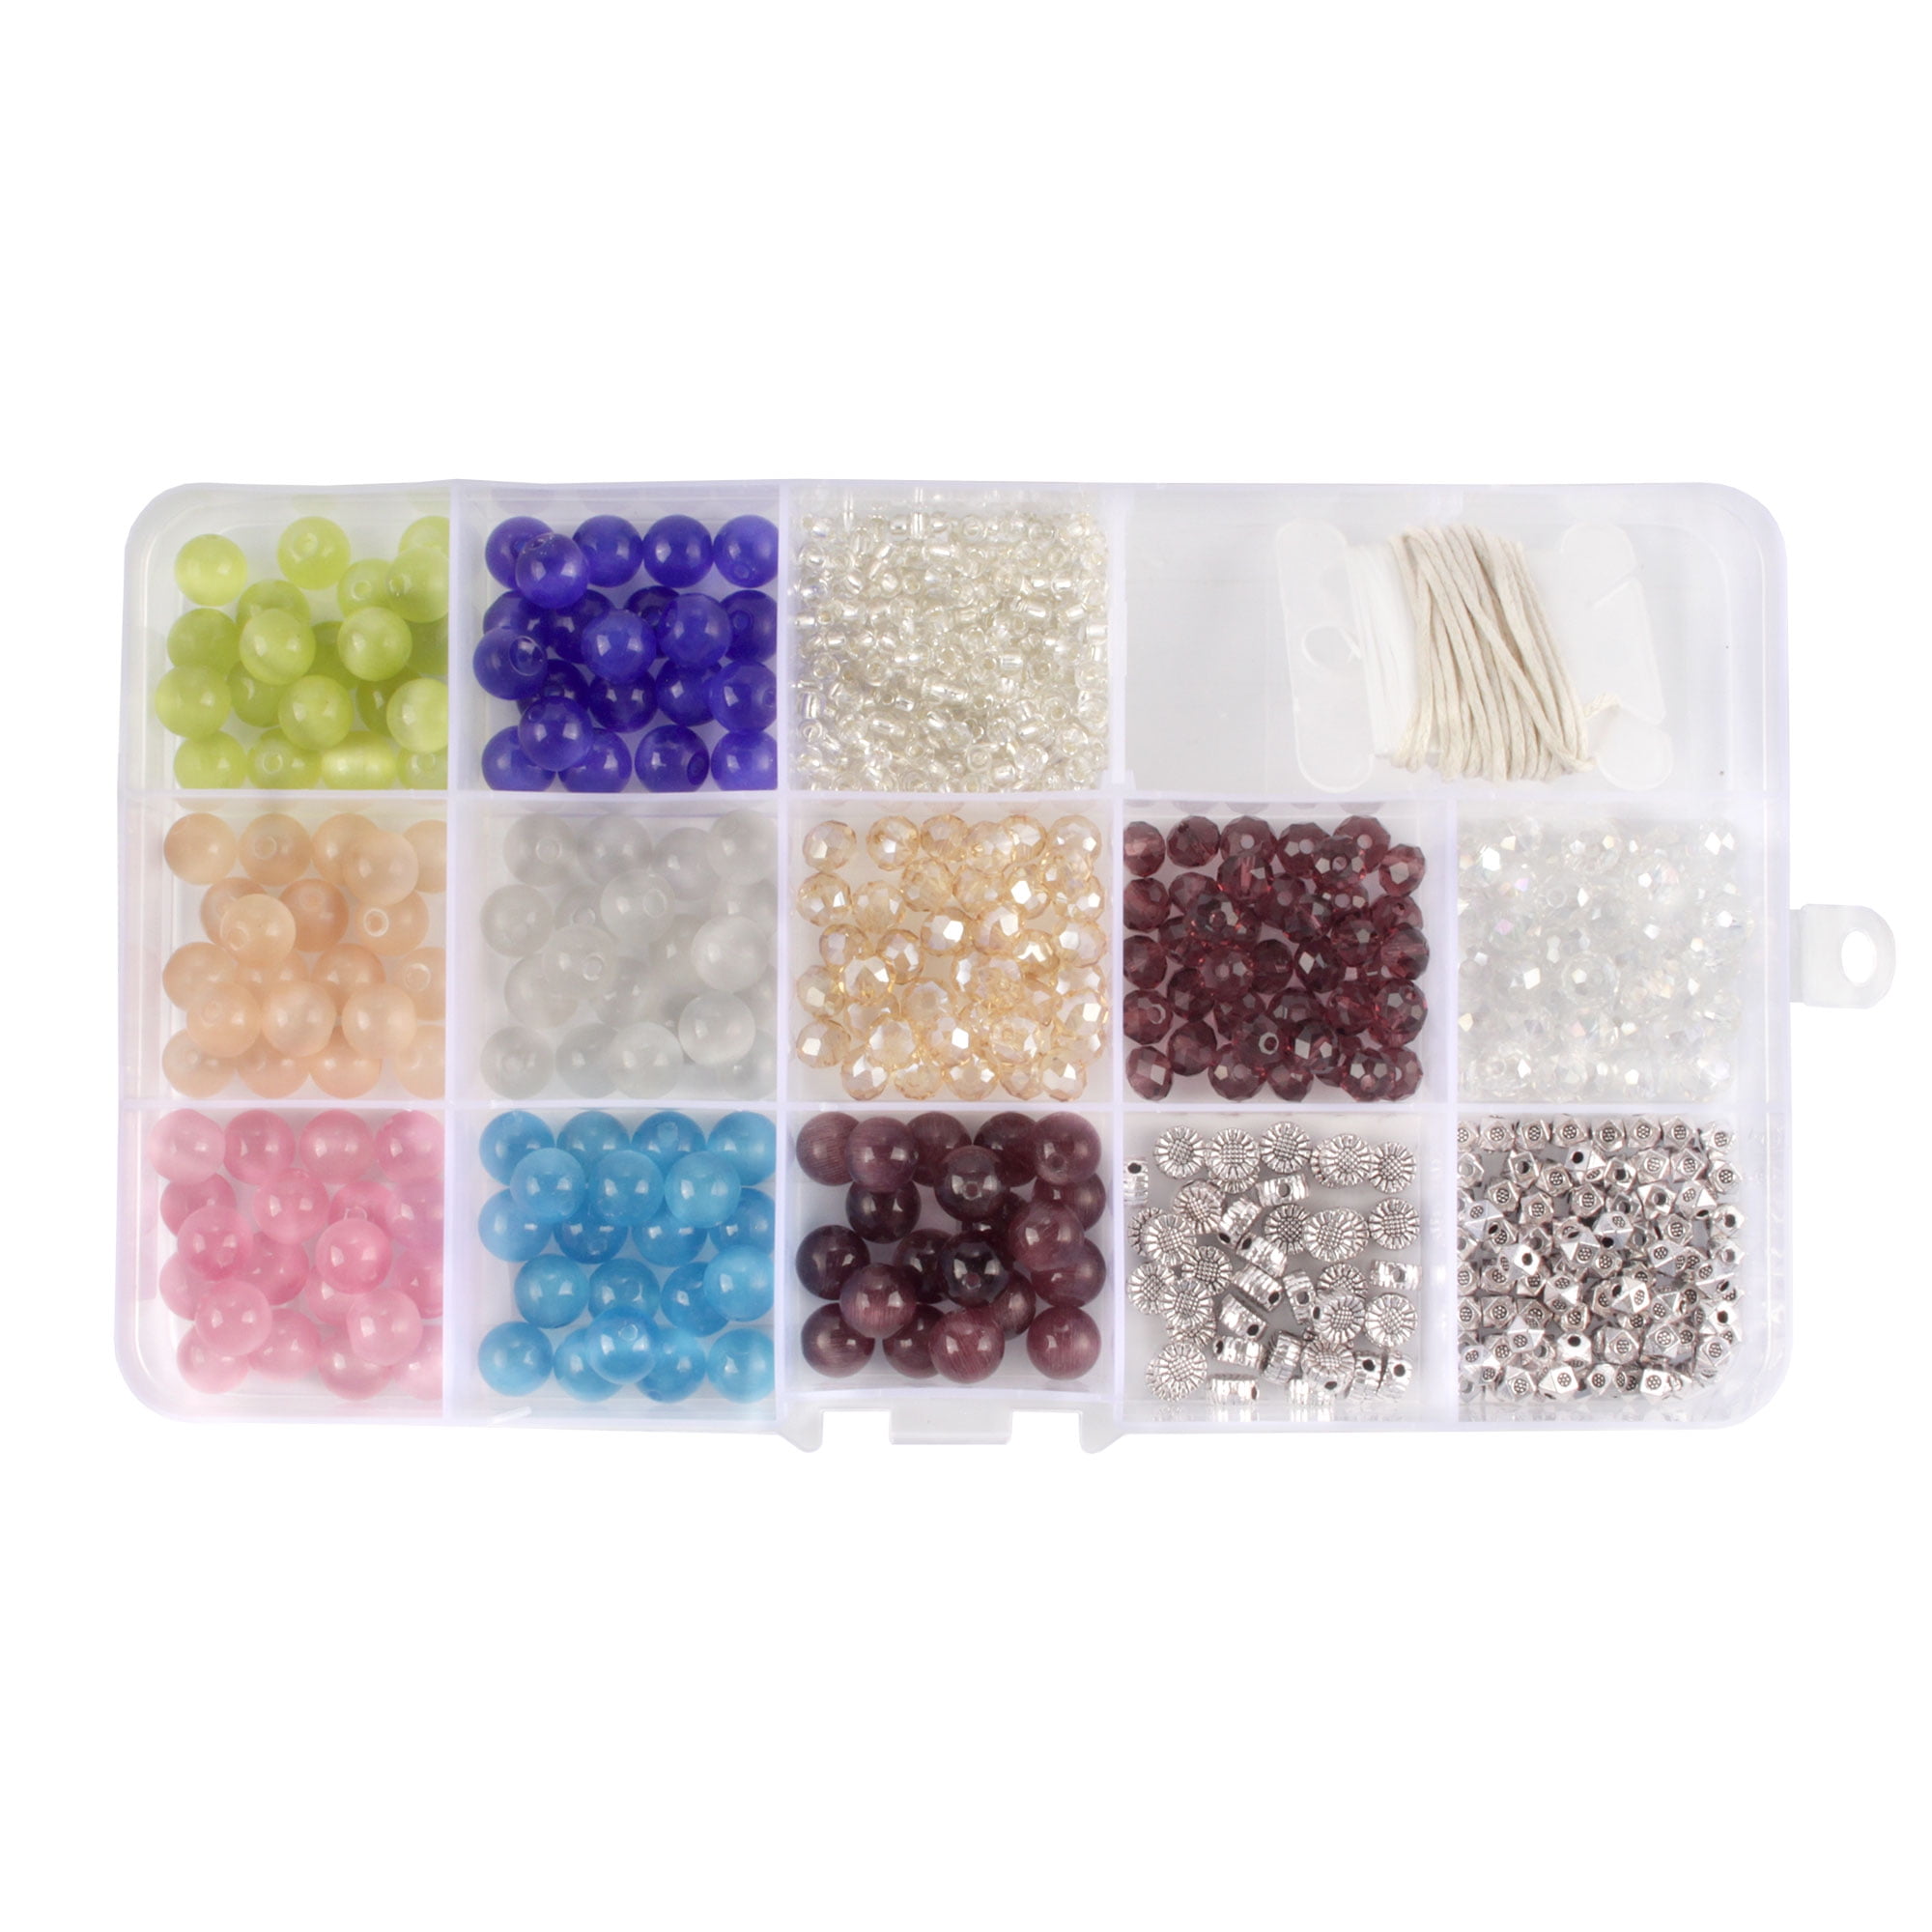 Assorted Bead Kits - DIY Bracelet and Necklace Craft Set - Round Glass ...